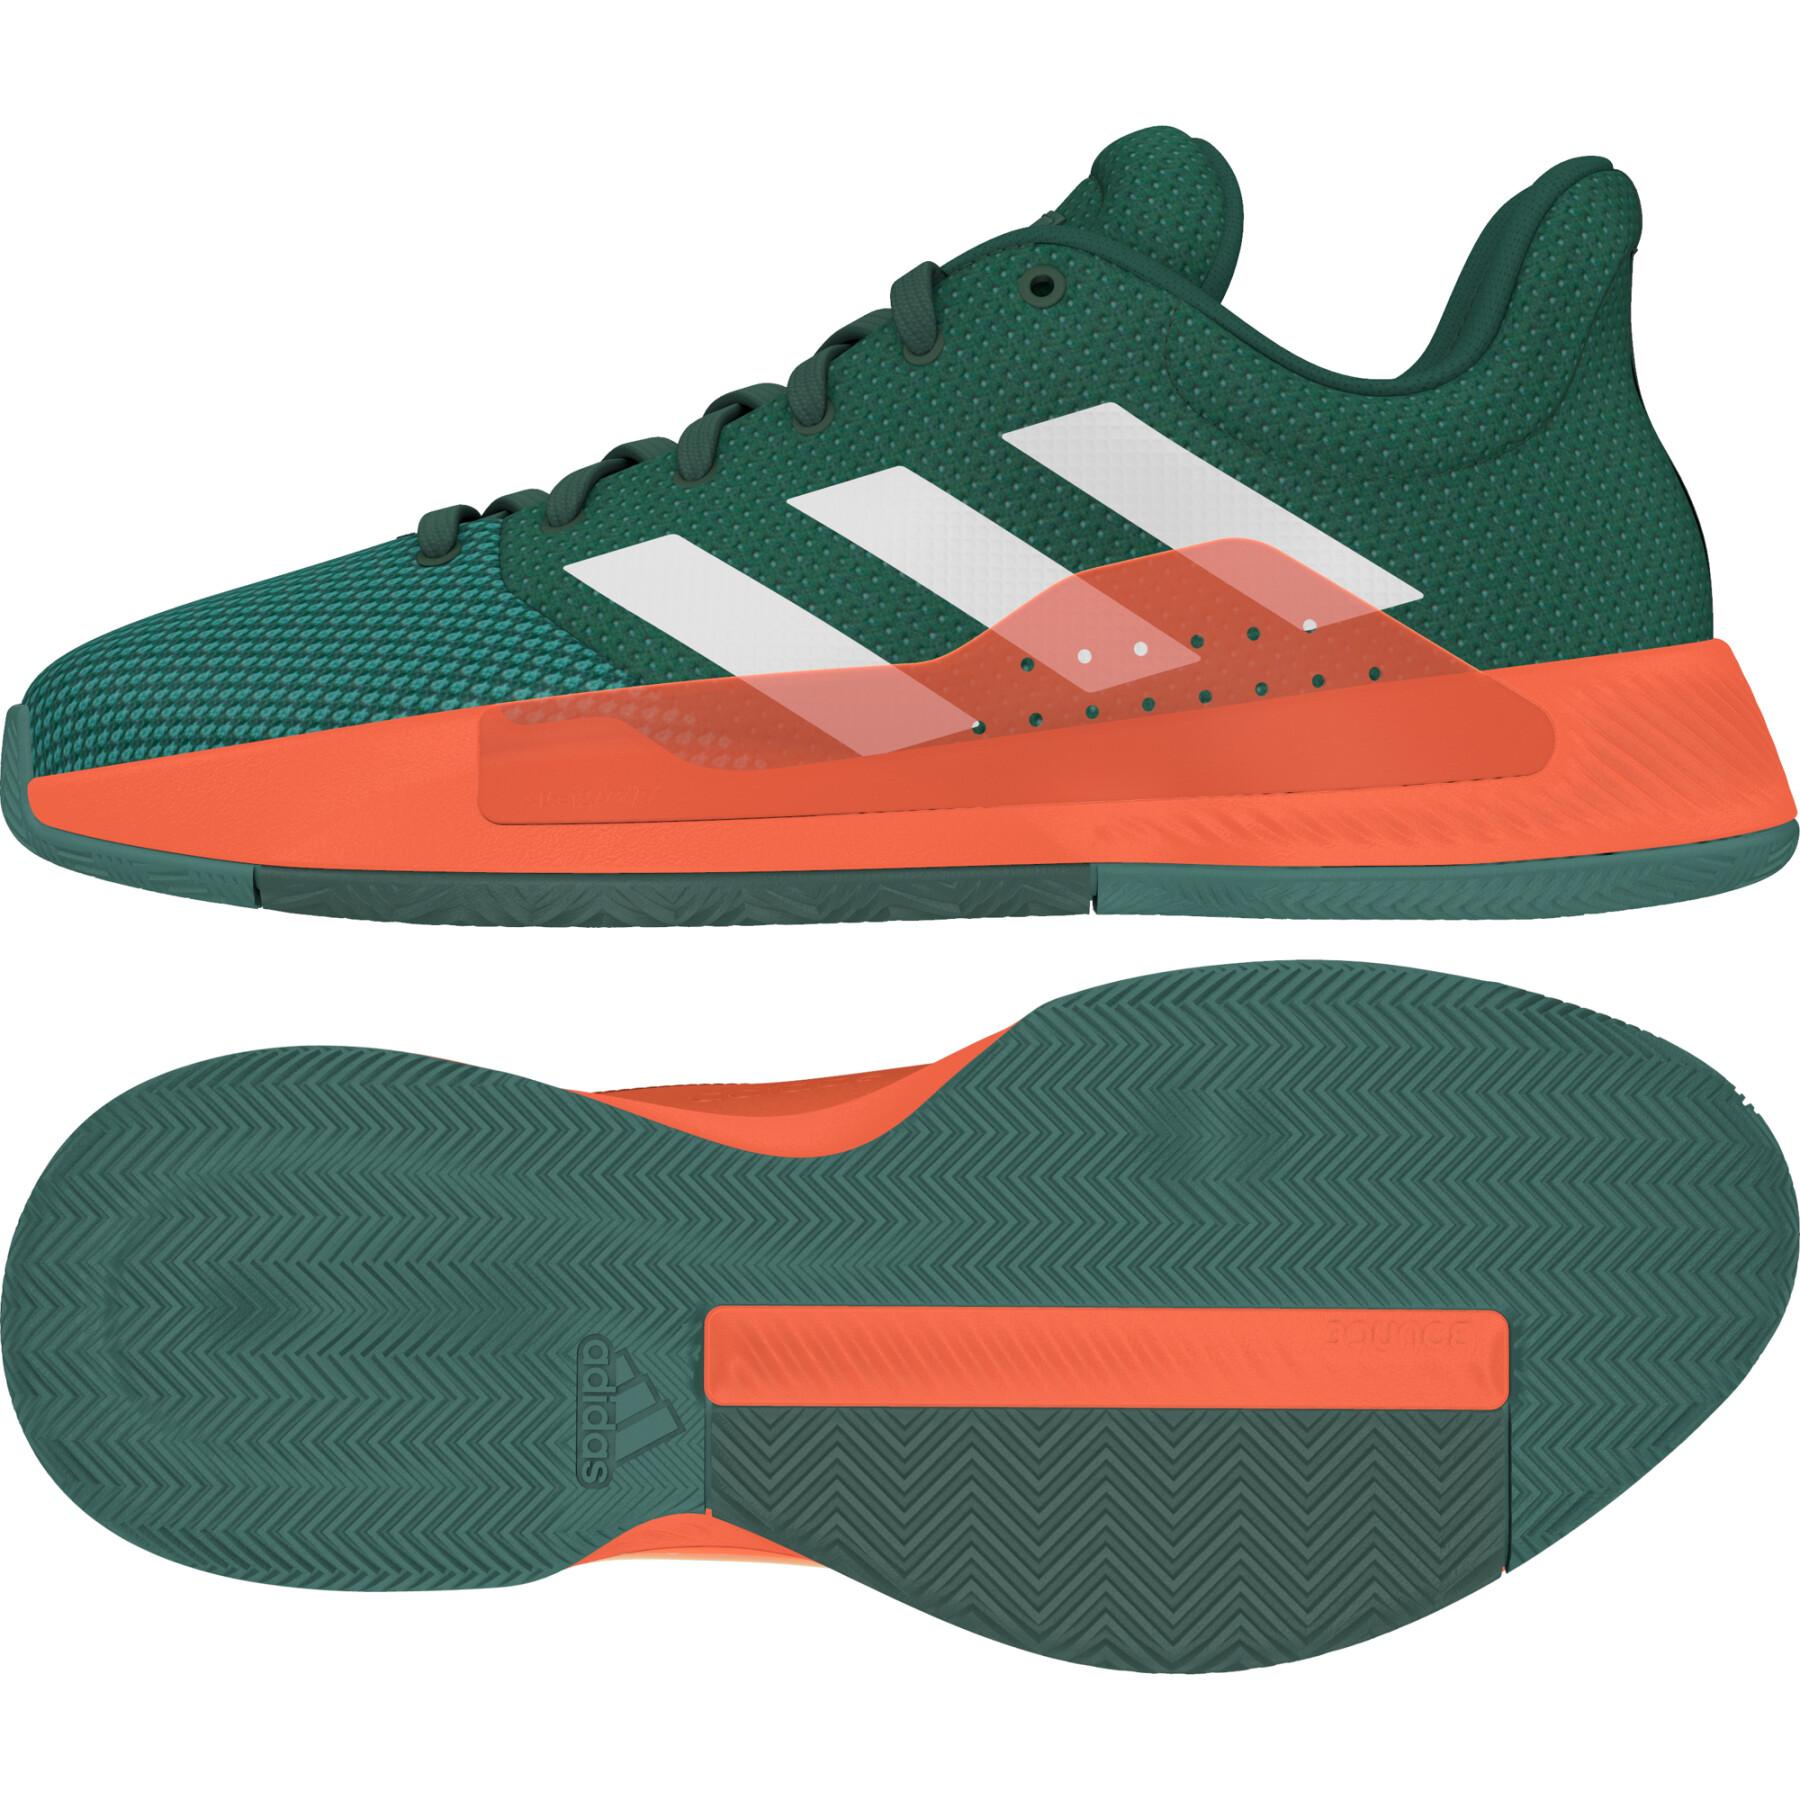 Indoor shoes adidas Pro bounce madness 2019